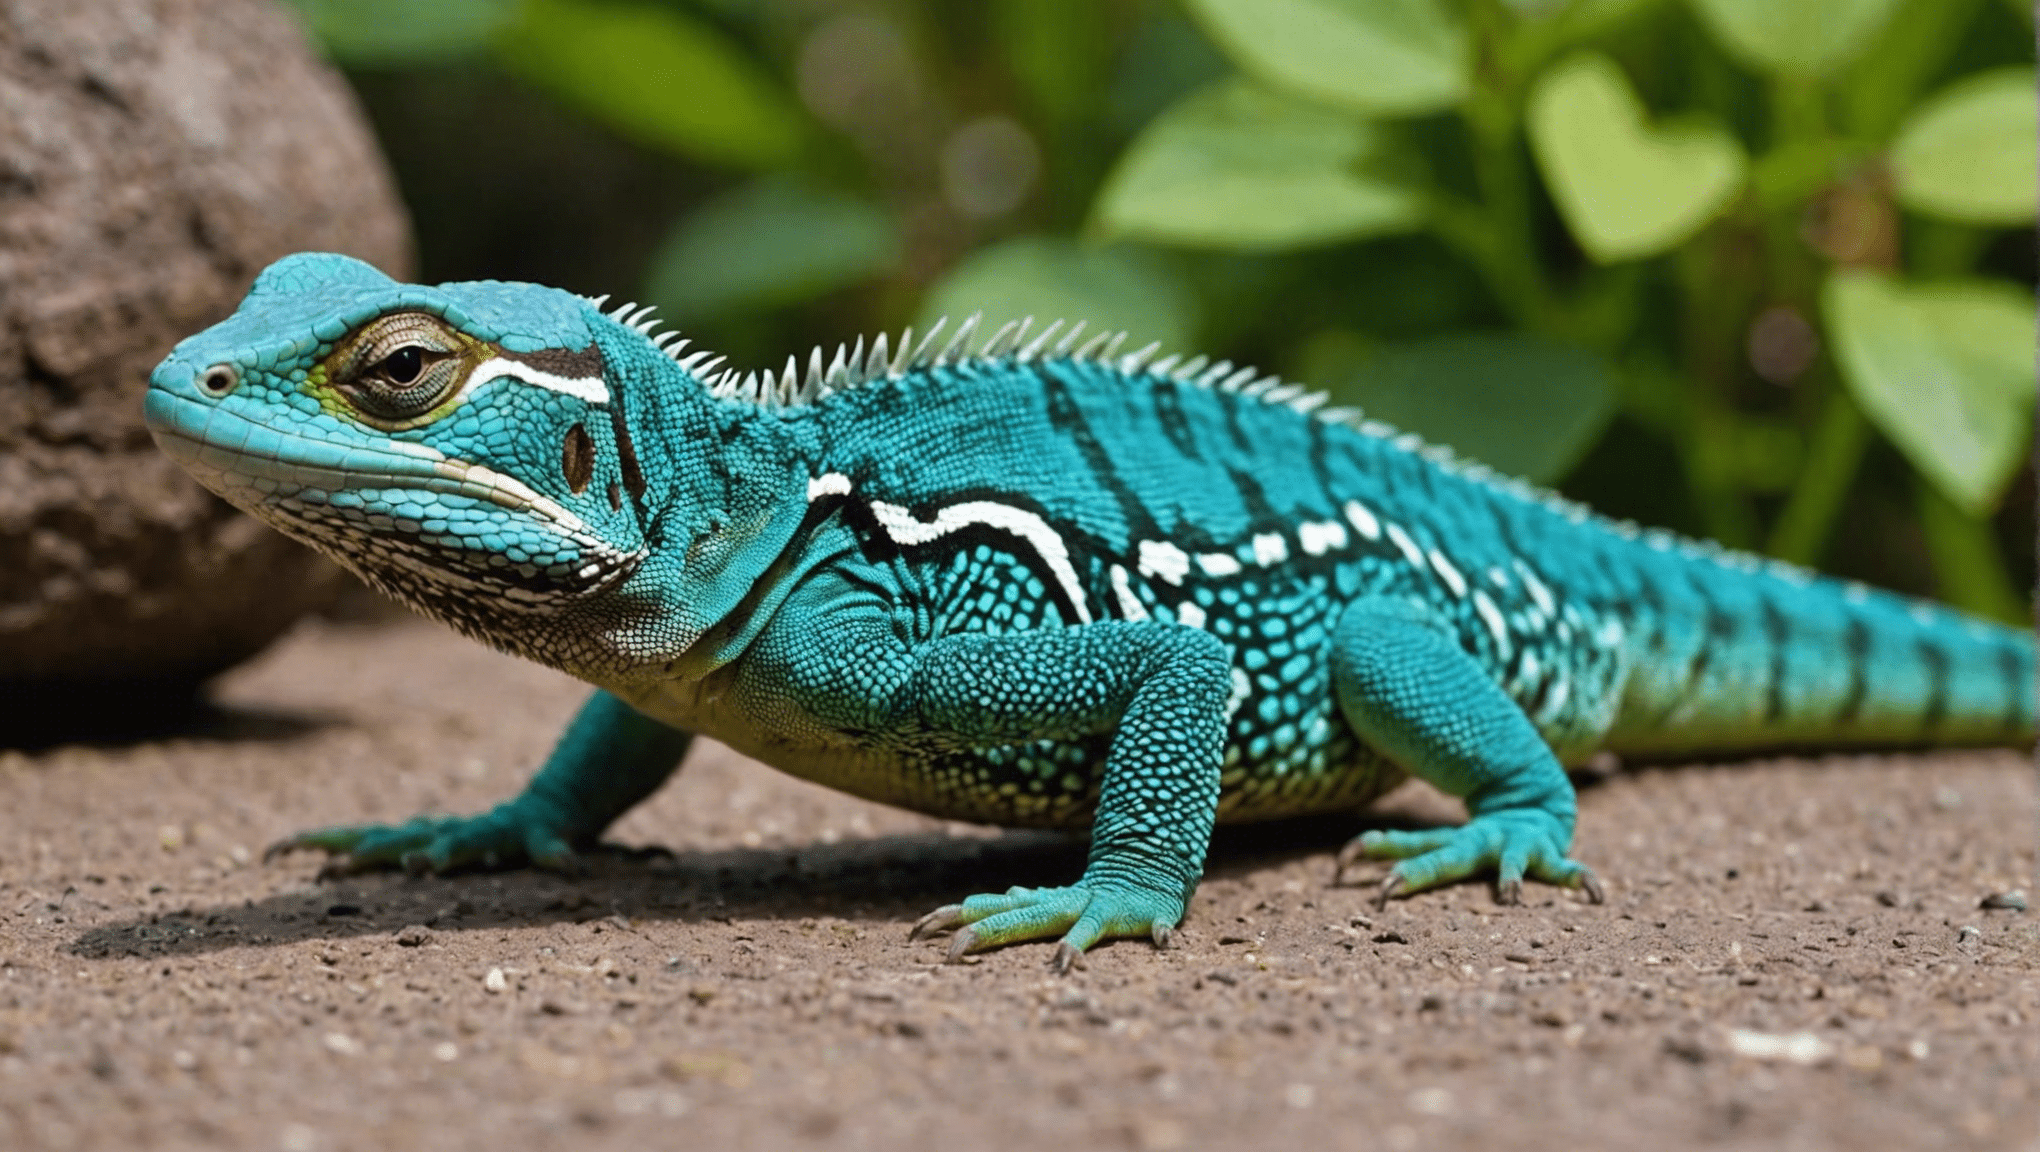 discover the reasons why lizards perform push-ups and the significance of this behavior in their natural habitat. learn about the potential functions and benefits of this interesting reptilian behavior.